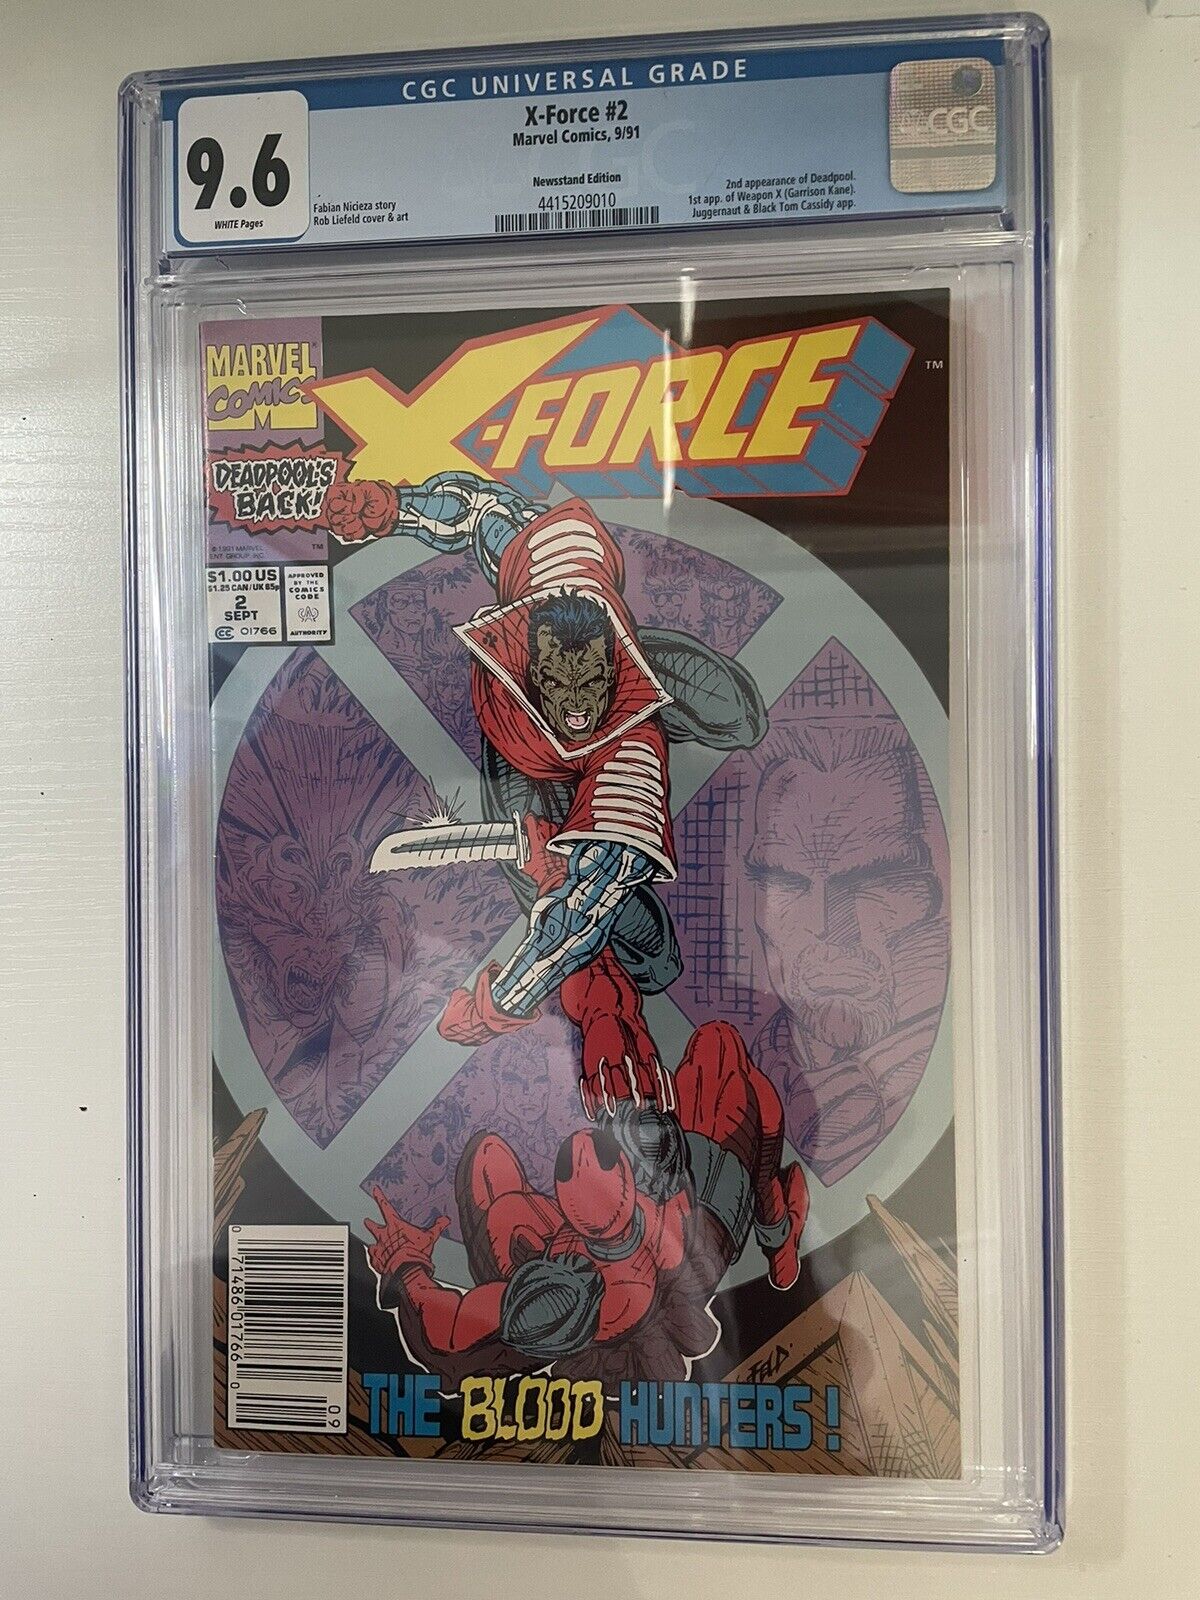 CGC Universal Grade 9.6 X-FORCE 2 NEWSSTAND KEY ISSUE 2ND APPEARANCE OF DEADPOOL